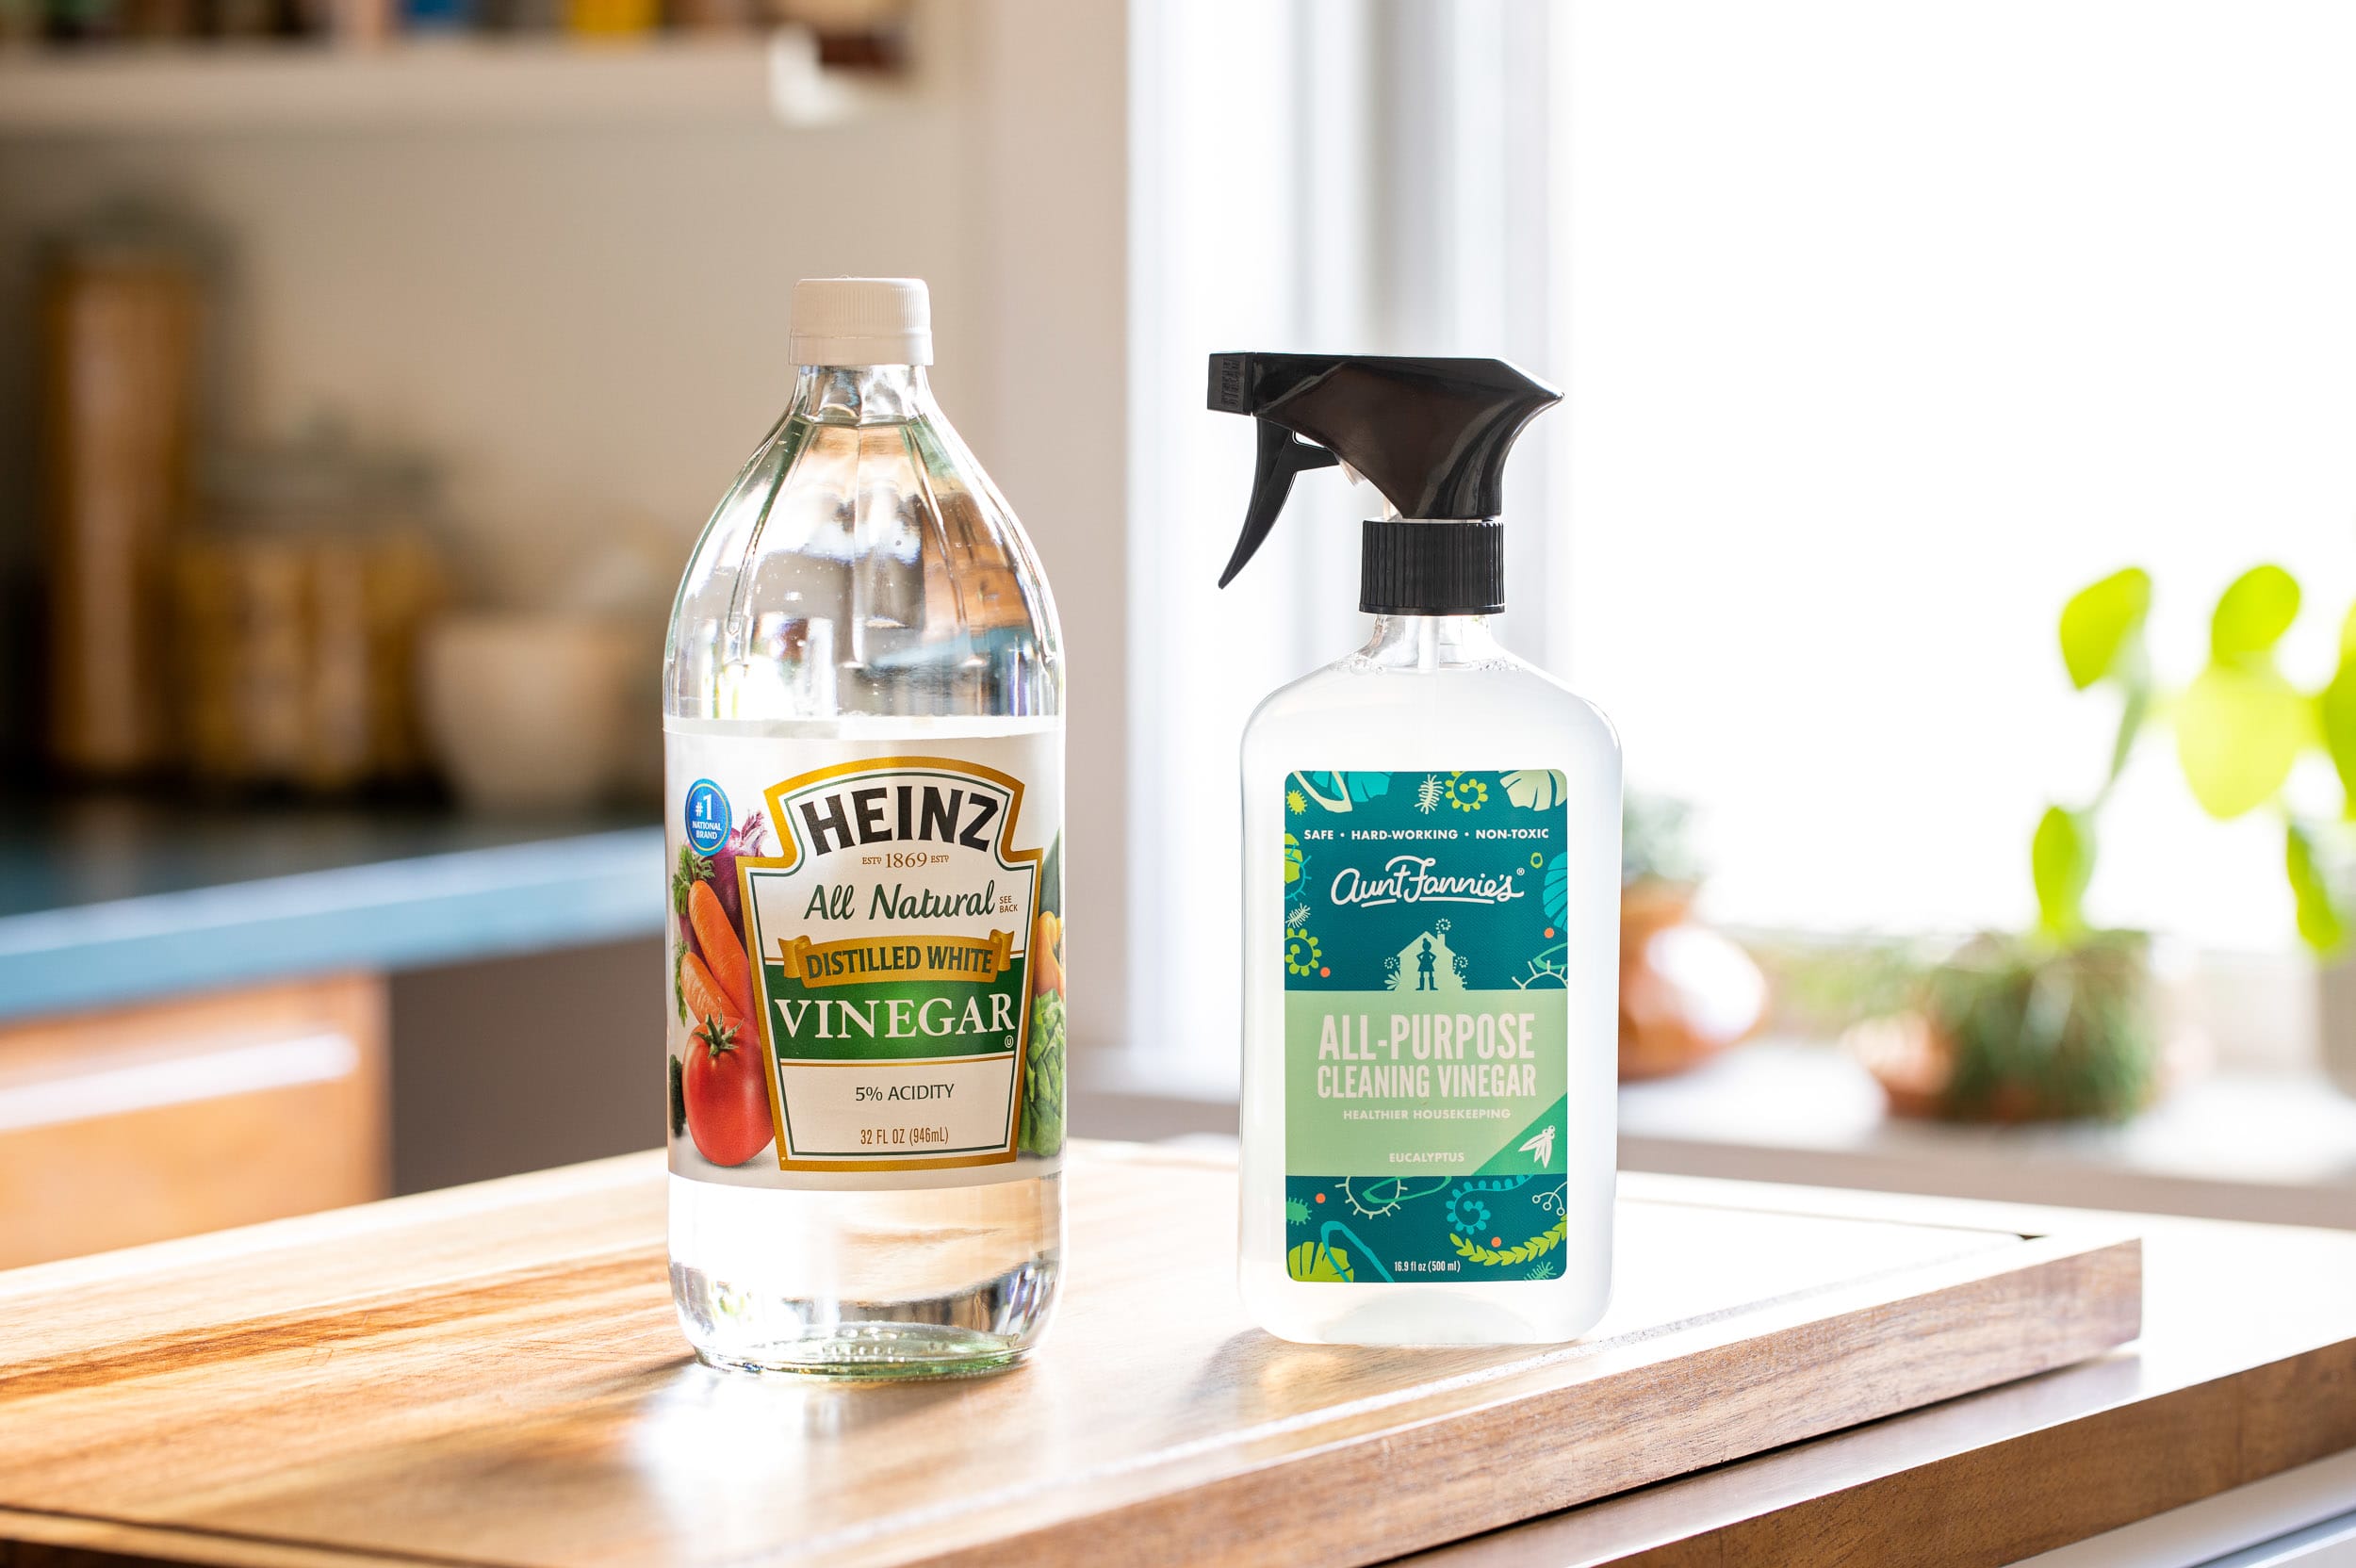 Cleaning Vinegar vs Cooking Vinegar: What's The Difference?